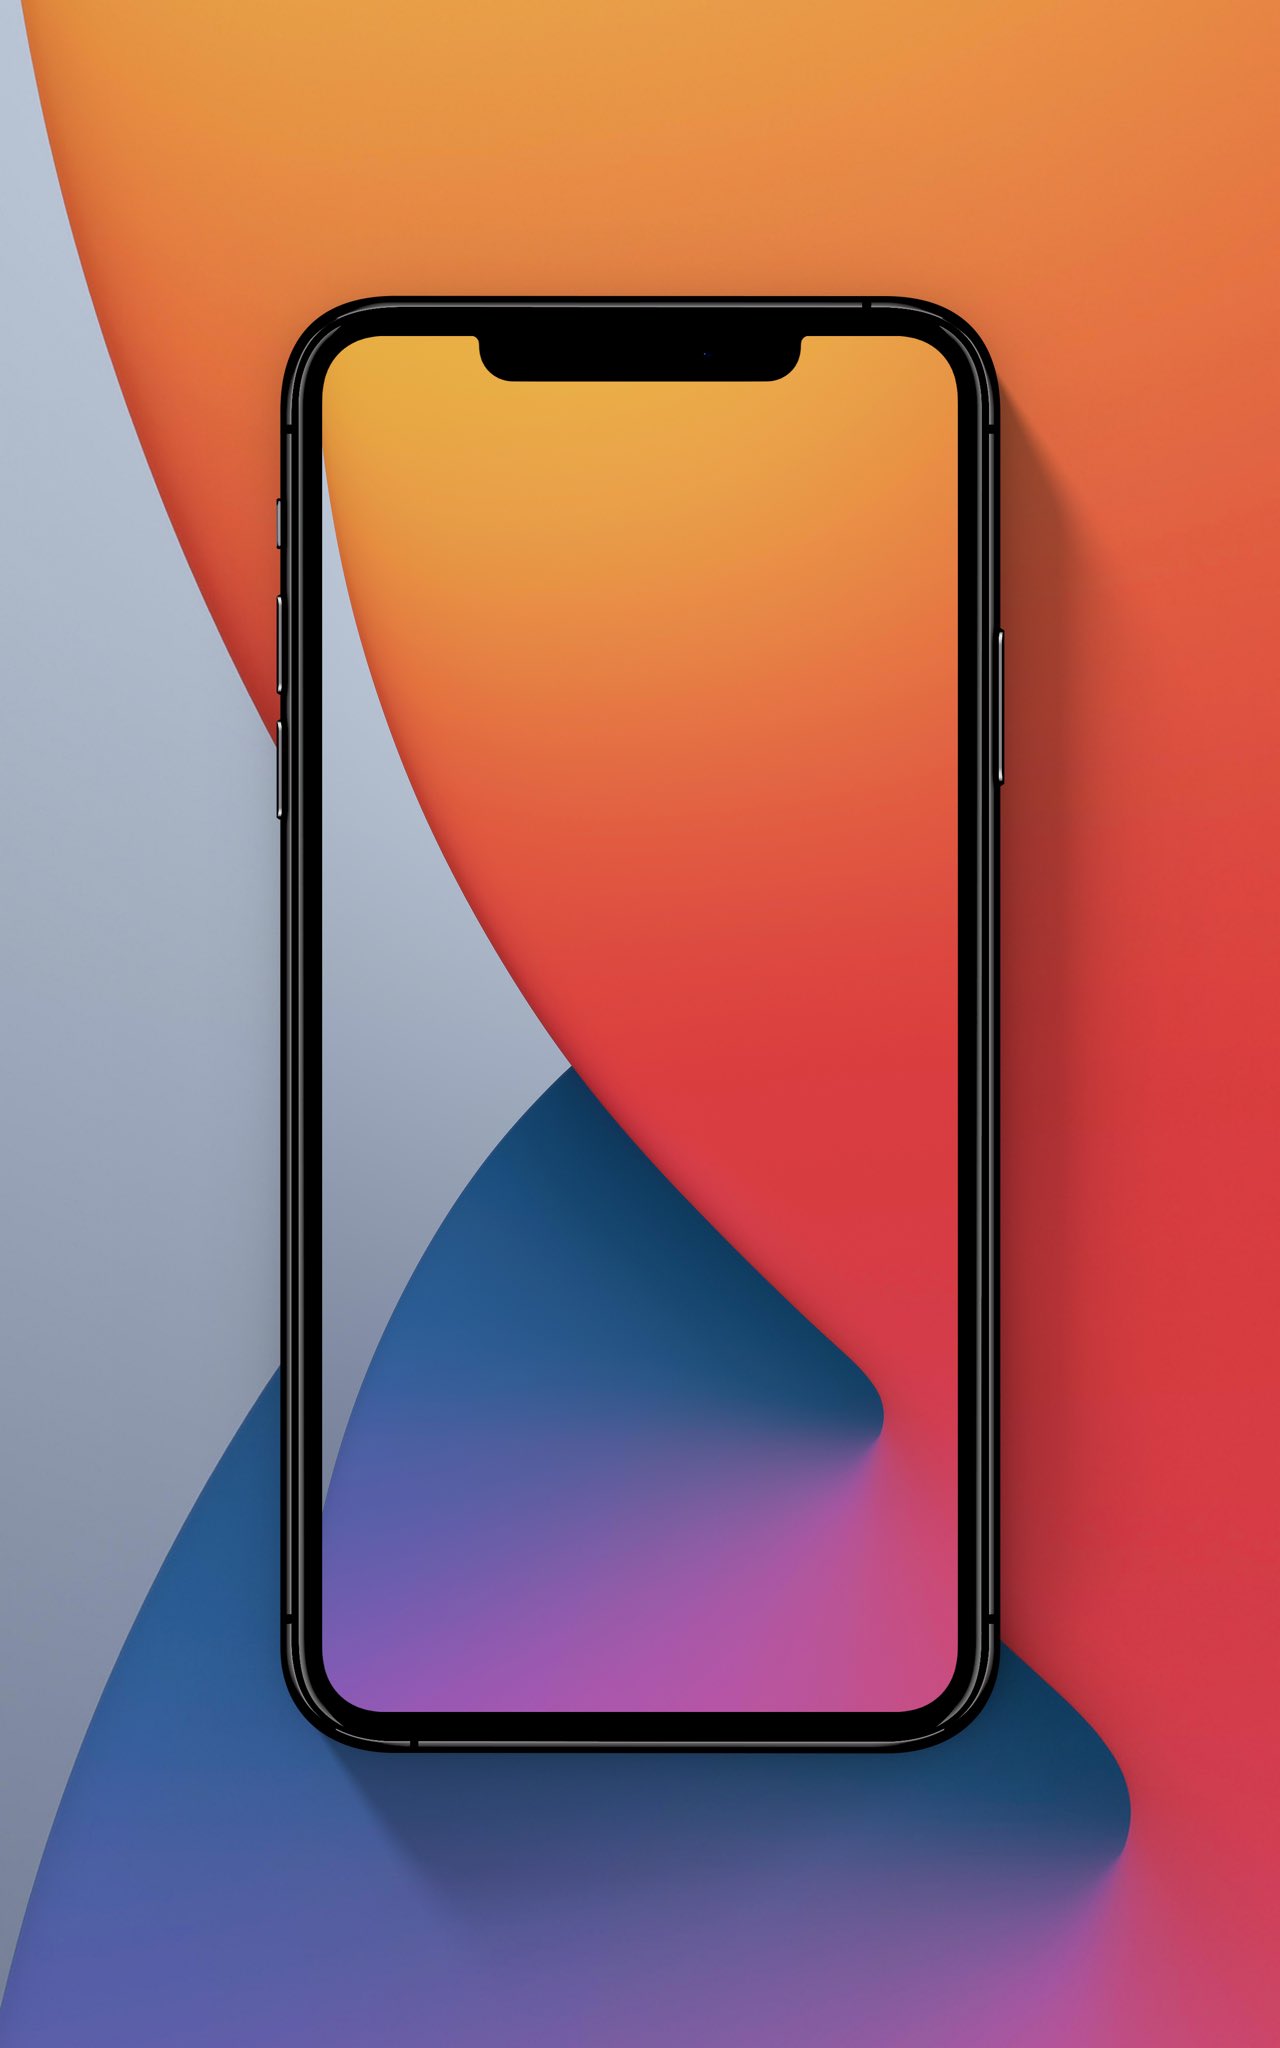 AR7 on Twitter wallpapers iOS14 iOS 14 stock wallpaper for 1280x2048